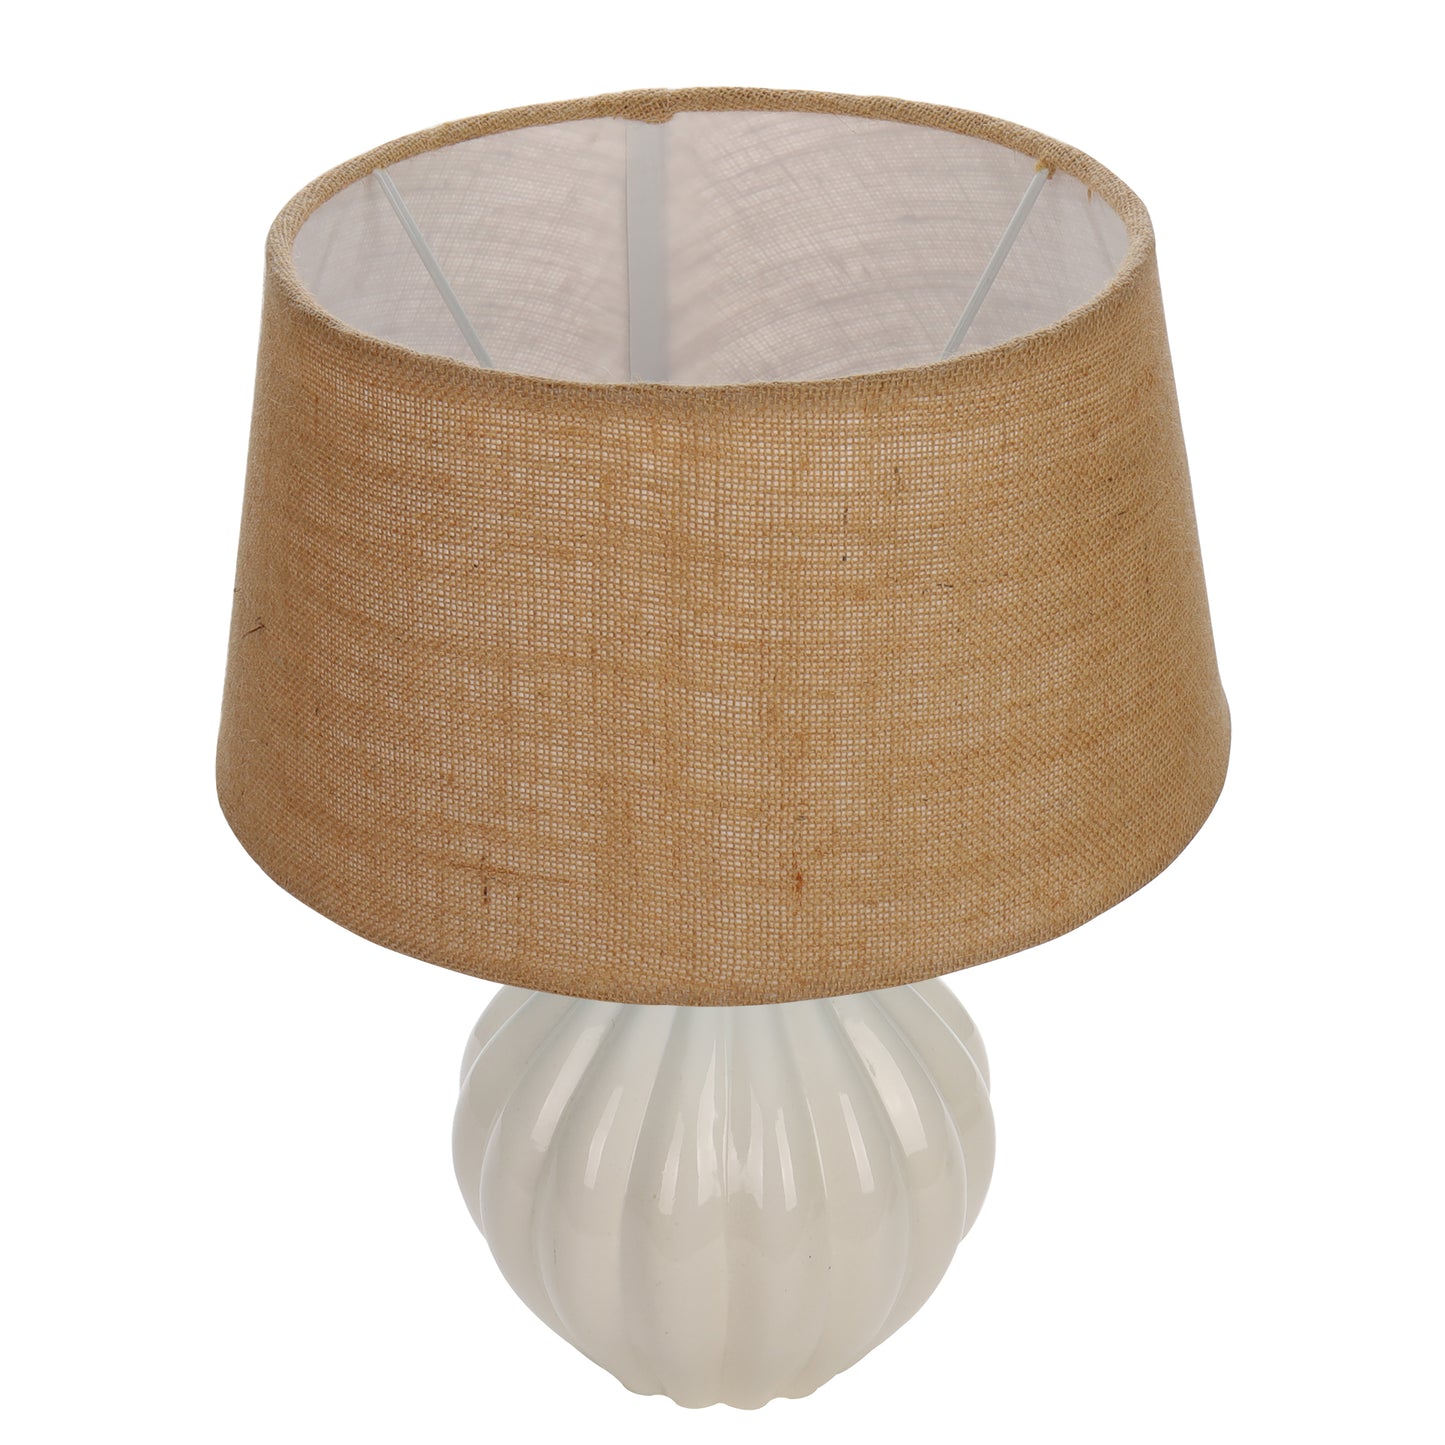 Home Traditional Ribbed Strip Pattern Ceramic Table Lamp For Living Room Table Desk Lamp With Shade